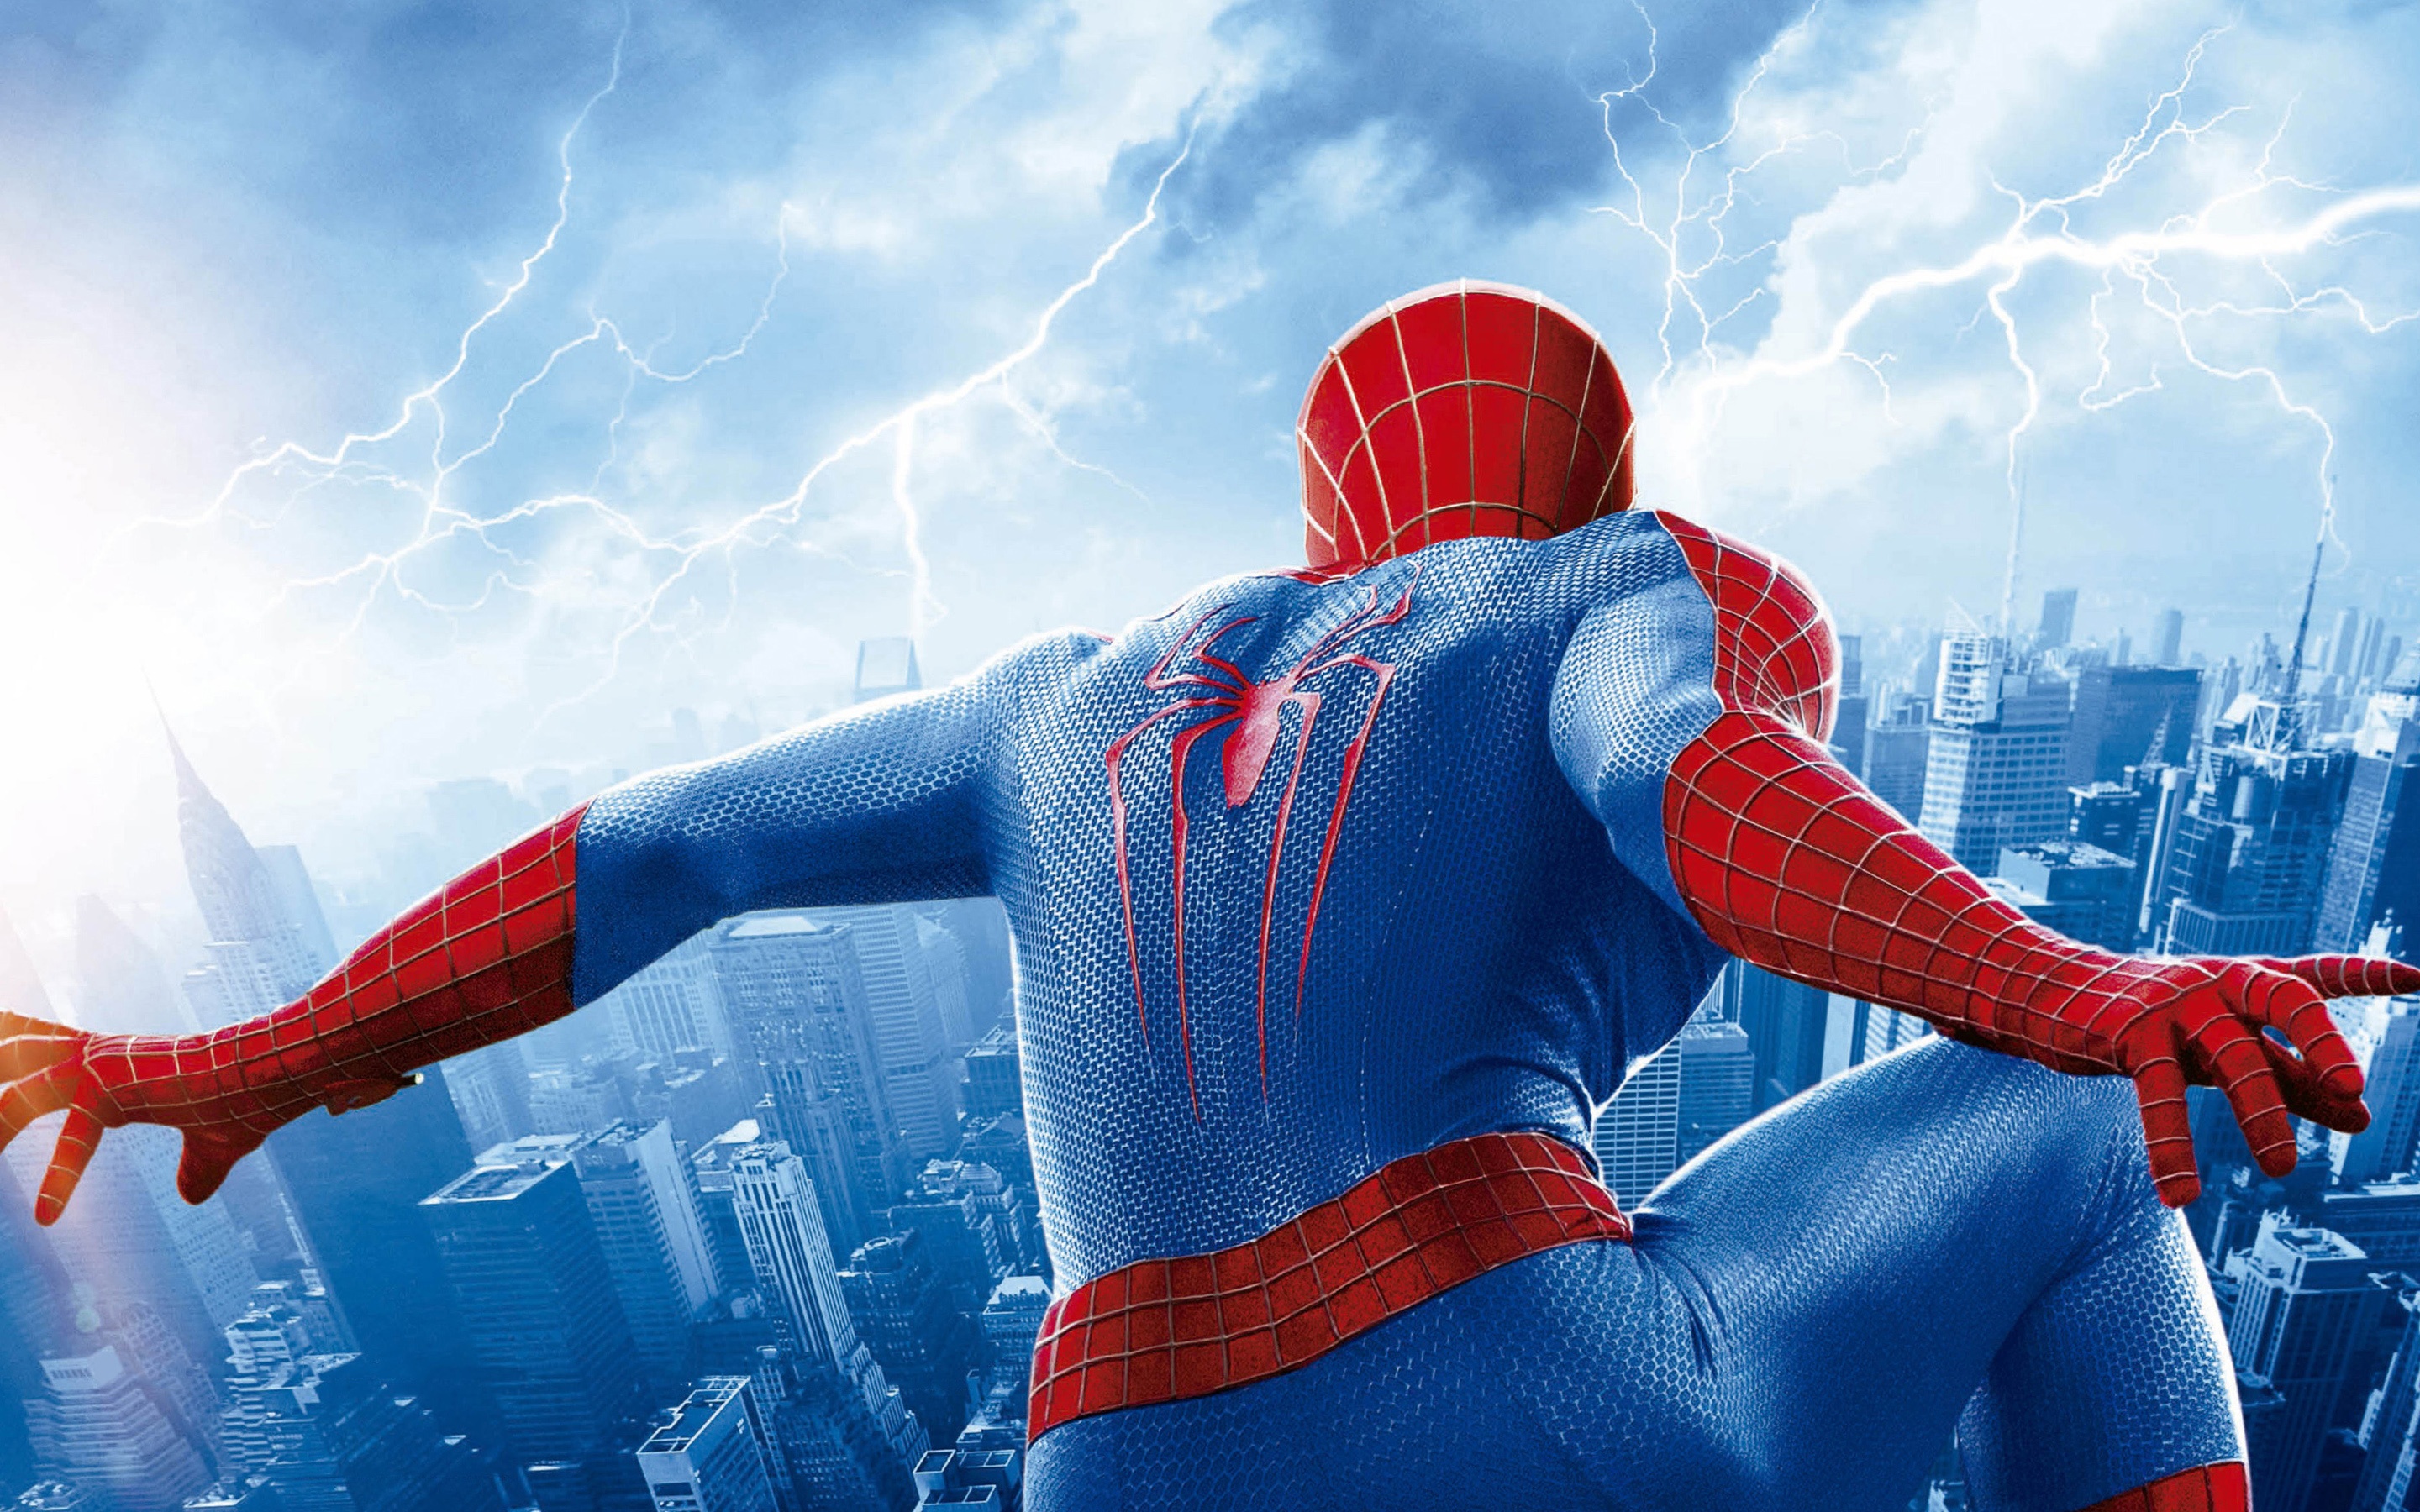 The Amazing Spider Man 2 Wallpaper in jpg format for free download